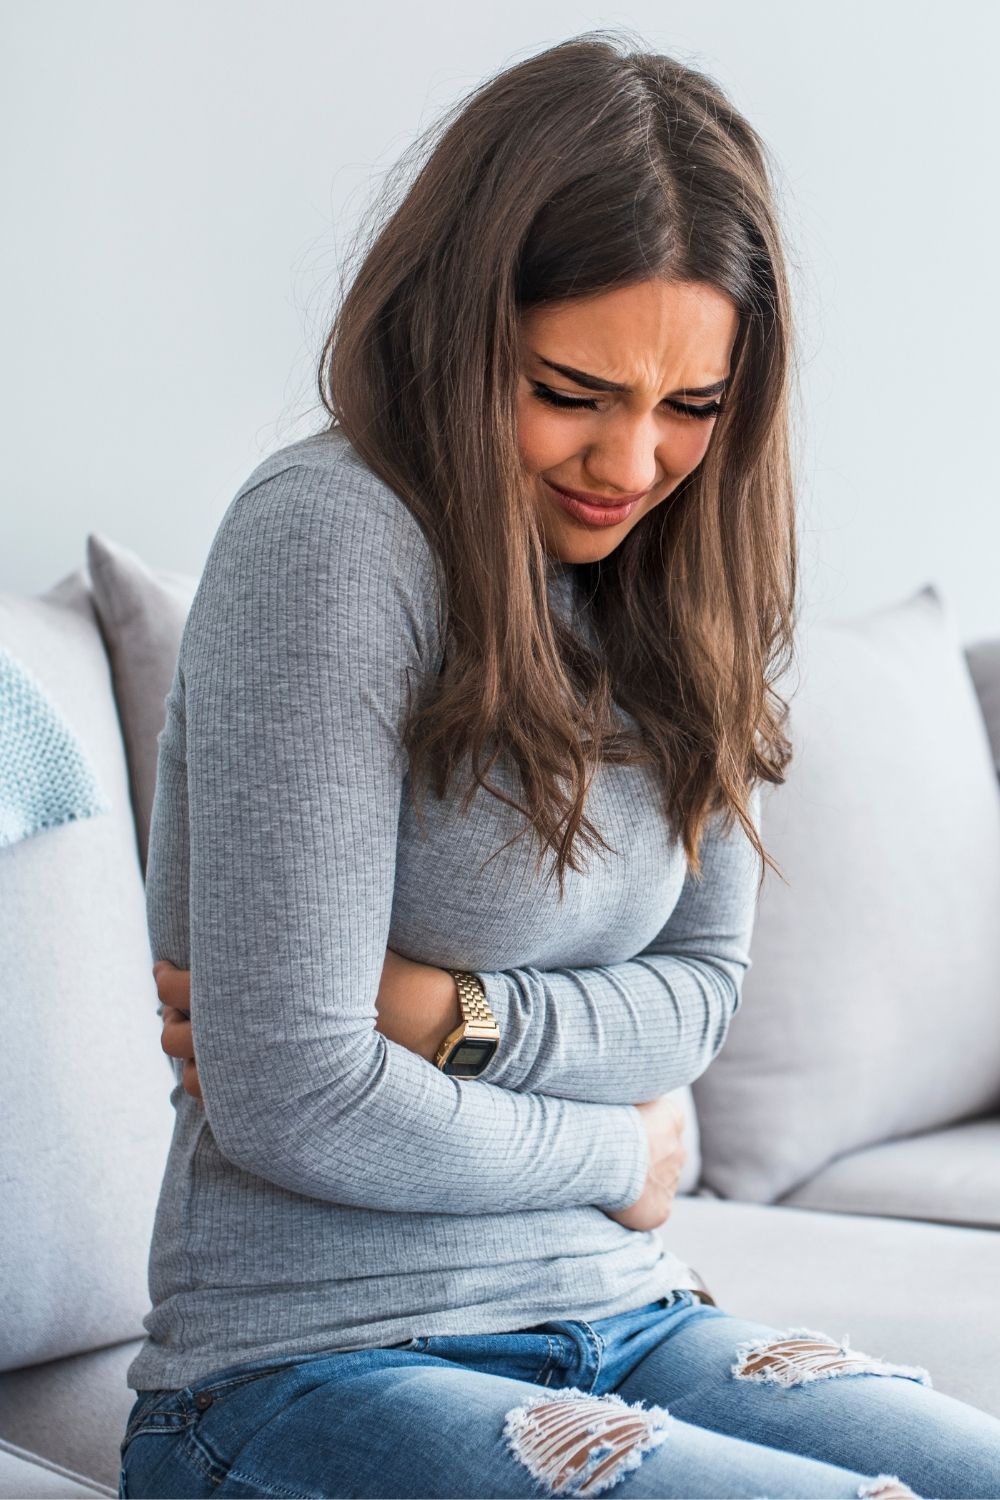 learn about irritable bowel syndrome in April